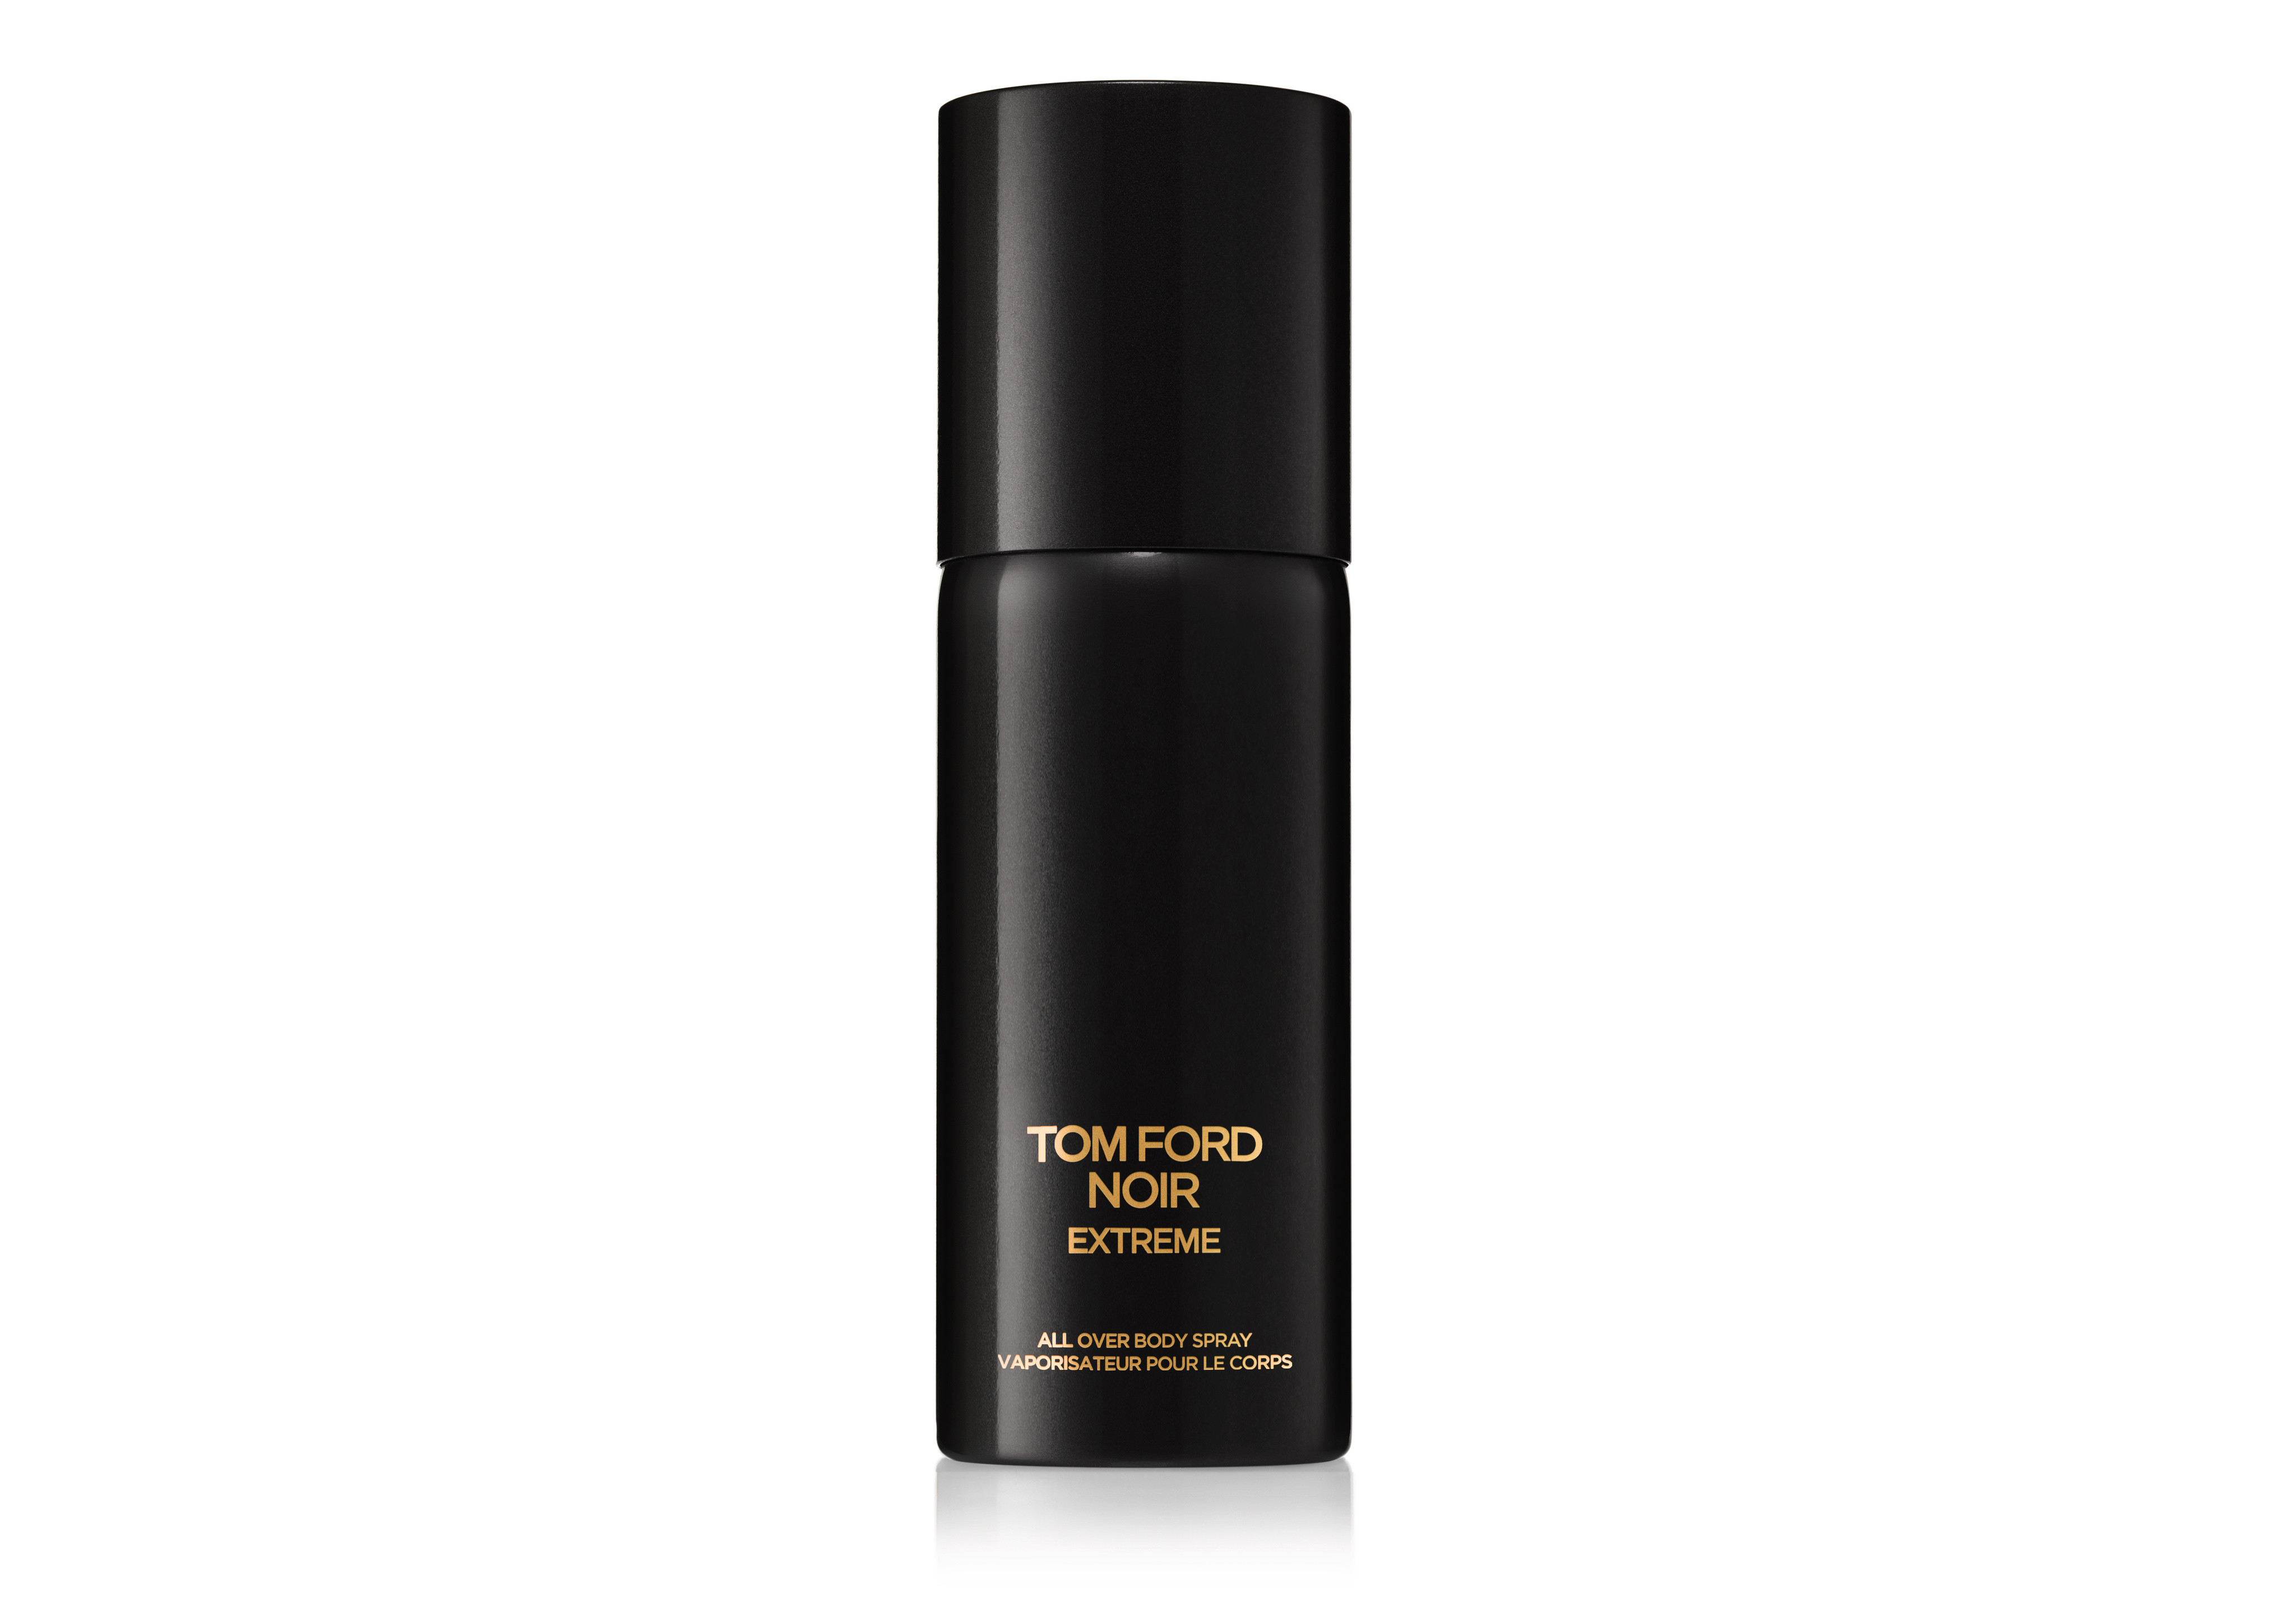 Tom Ford Beauty - Noir Extreme All Over Body Spray 150 ml, Black, large image number 0